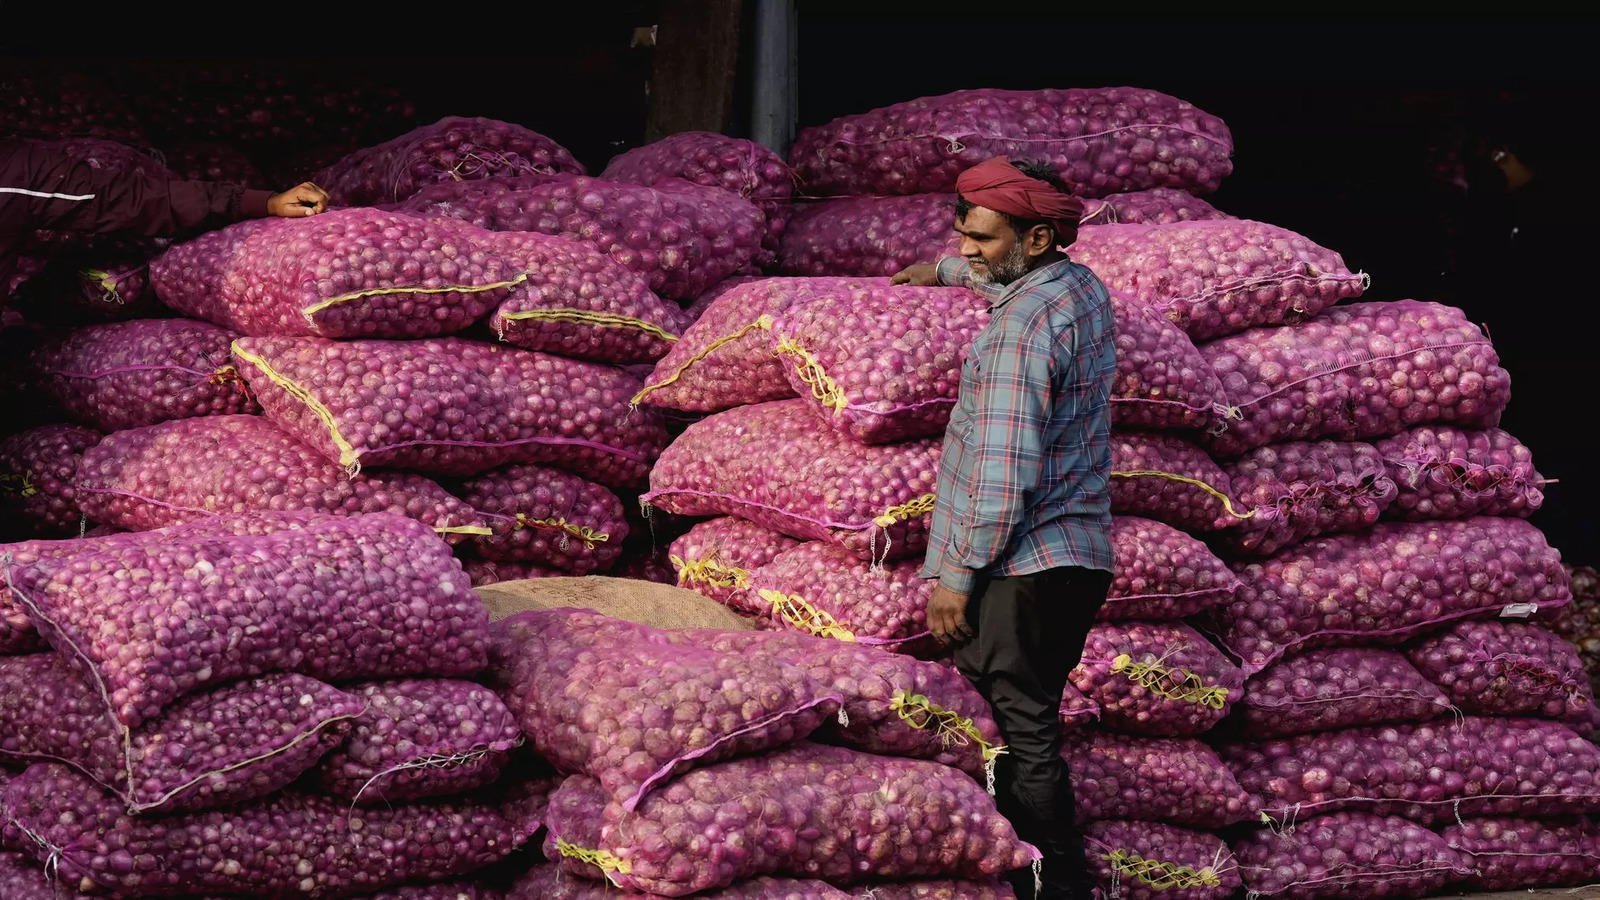 Onion may become cheaper by January 2024, government expects price to be below Rs 40 per kg